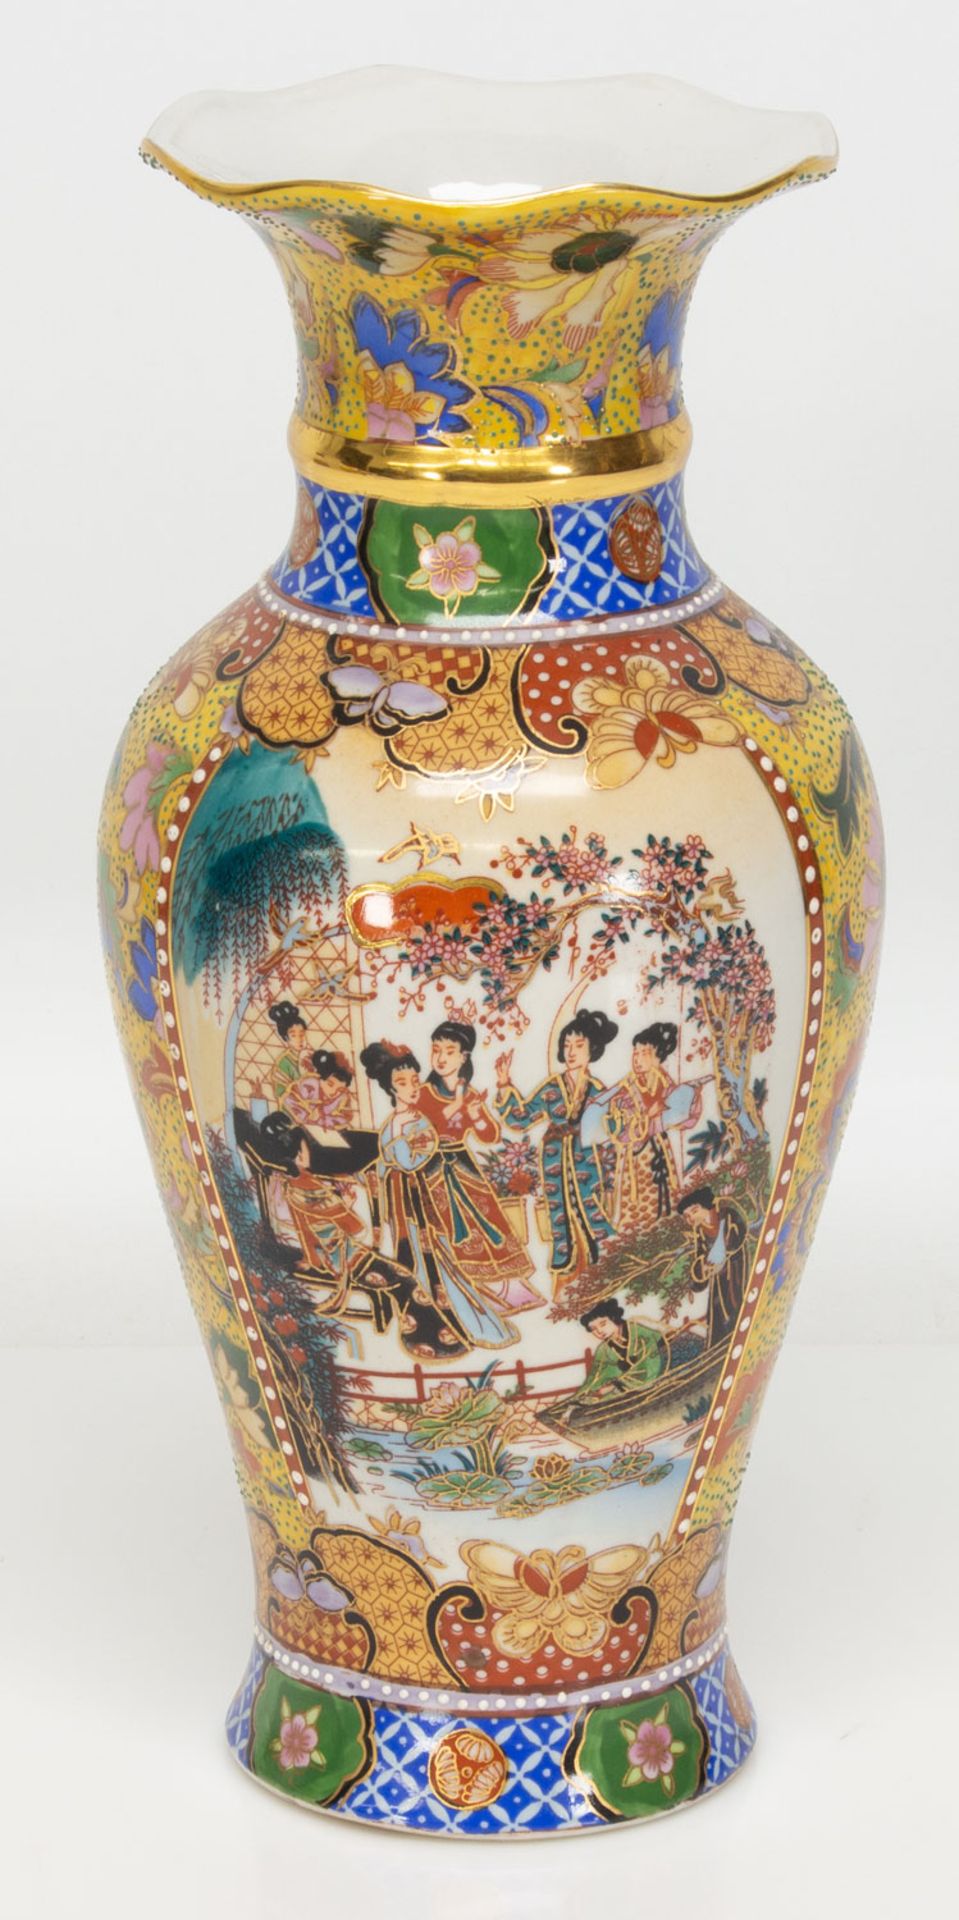 Bodenvase - Image 2 of 3